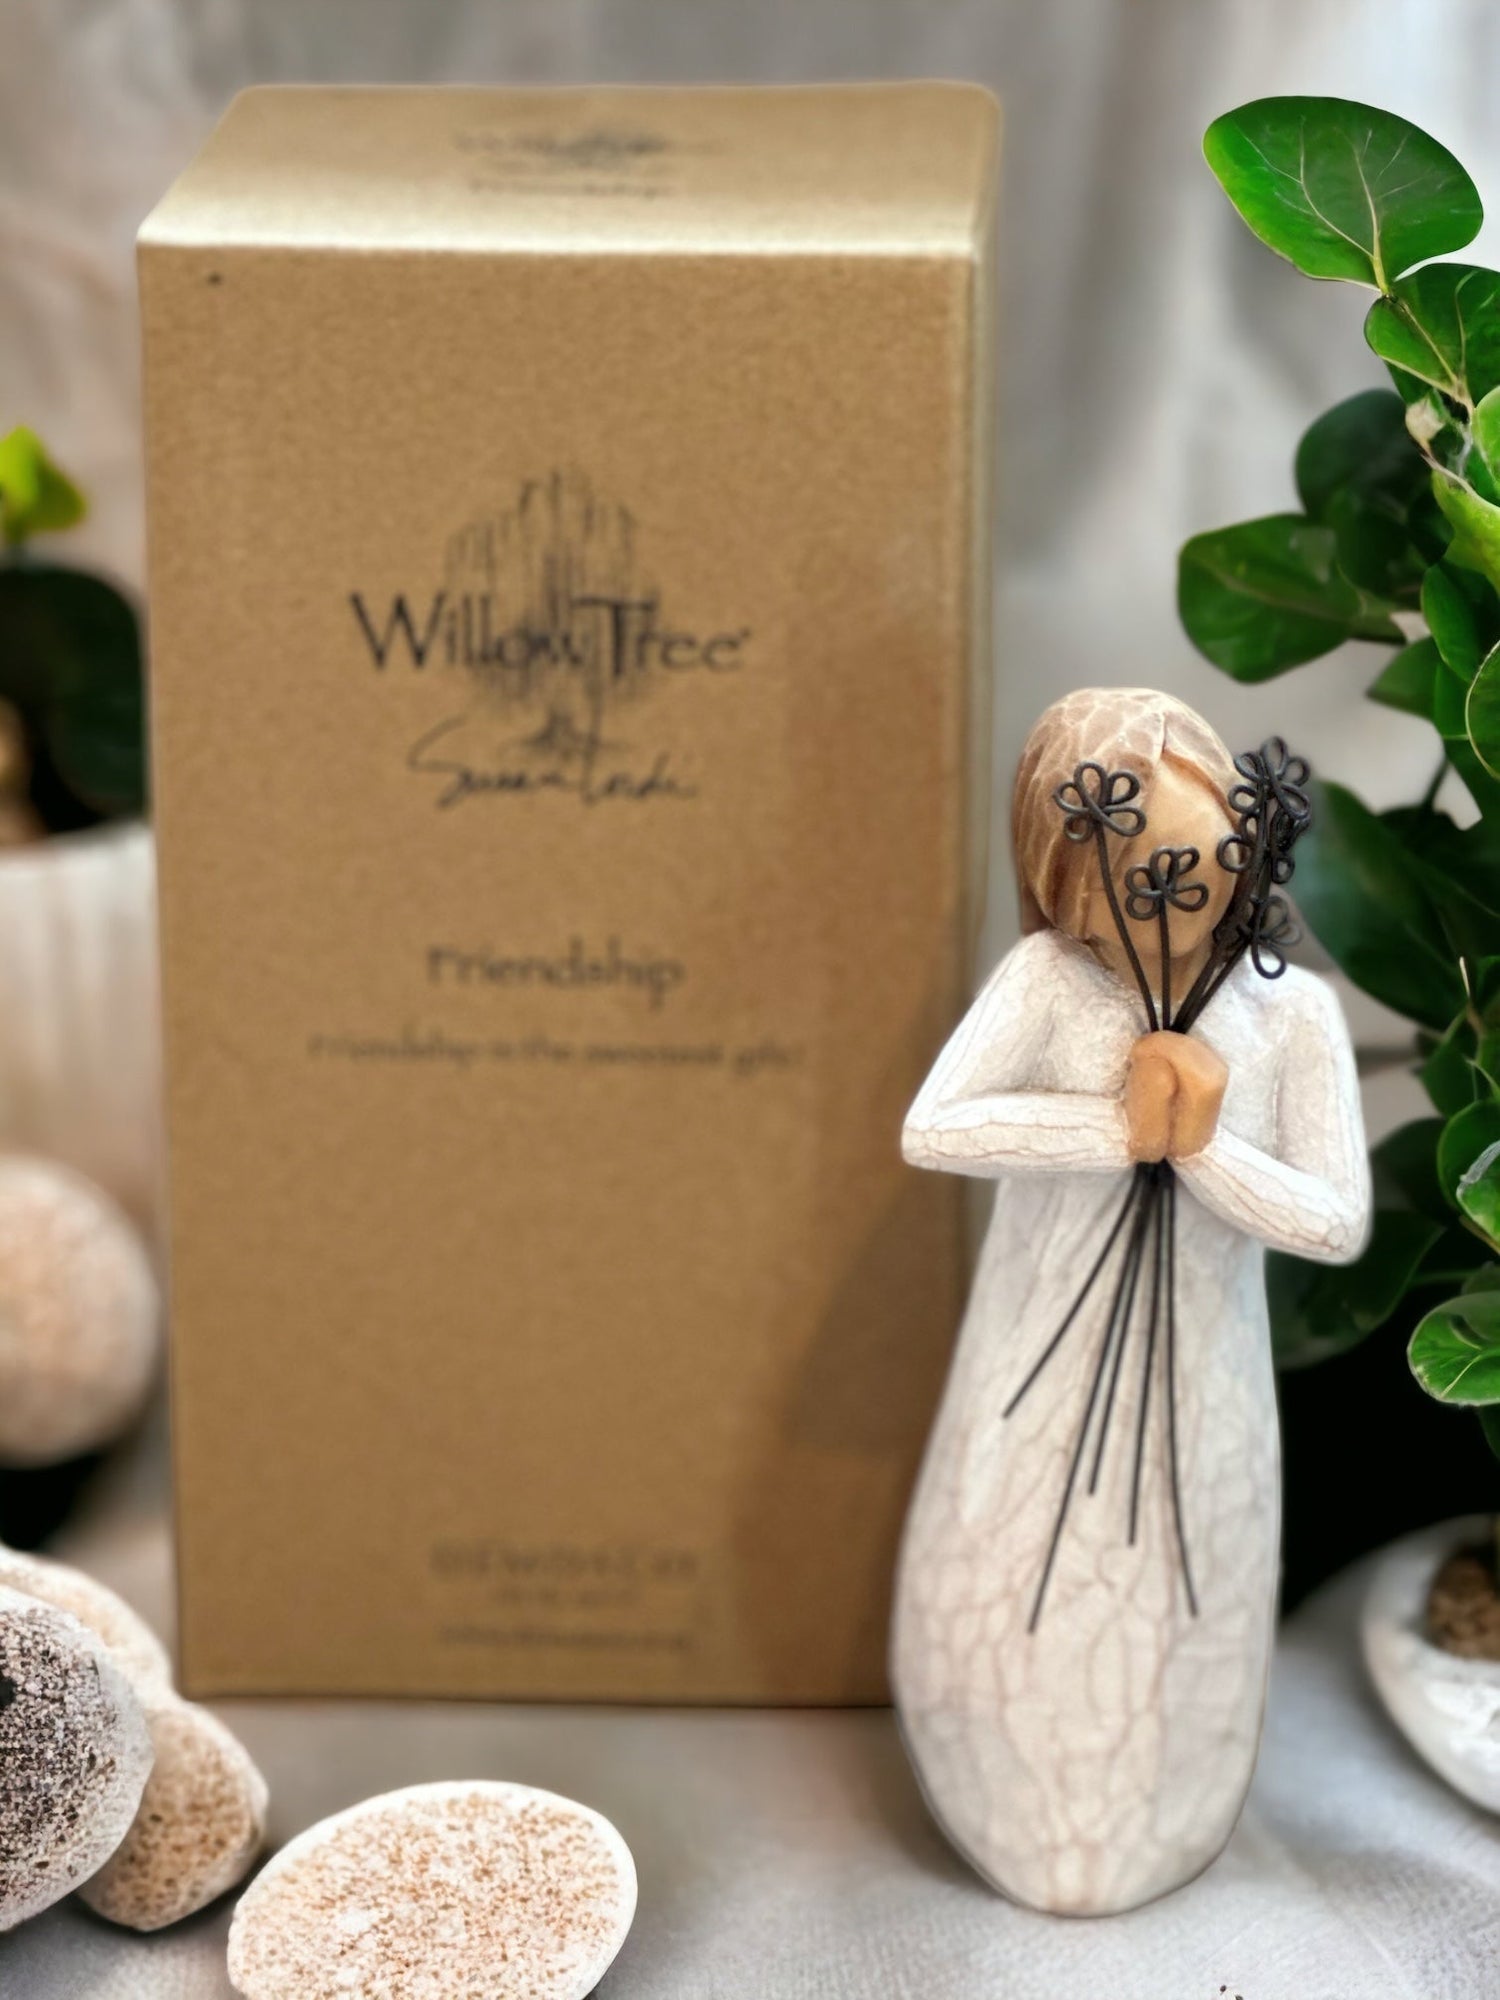 WillowTree Collection-Friendship